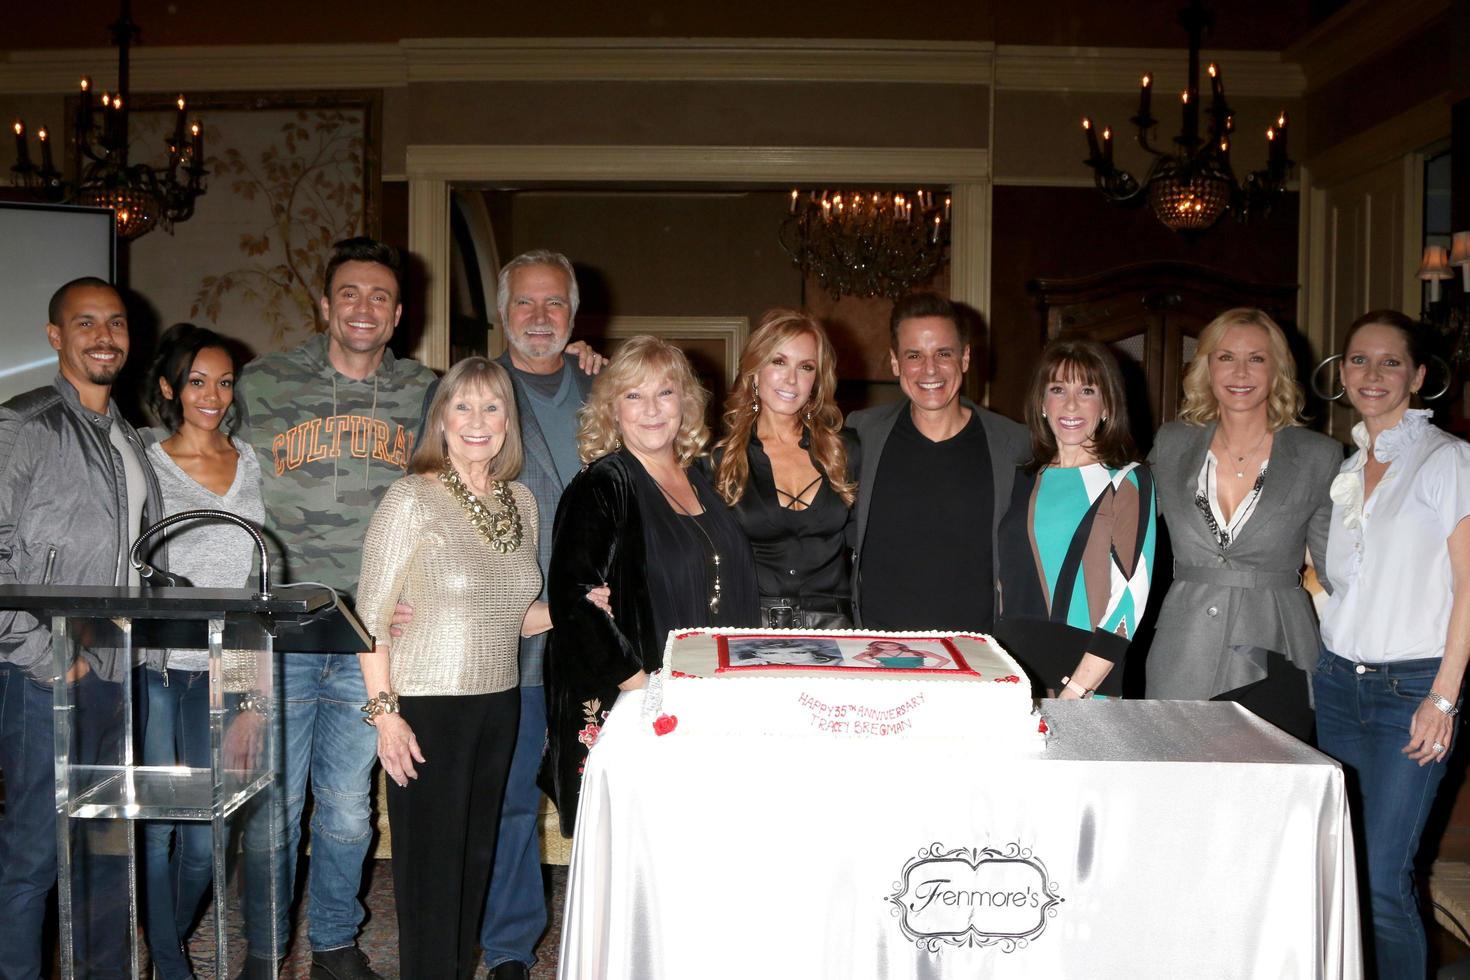 LOS ANGELES - FEB 2  James, Morgan, Goddard, Adams, McCook, Maitland, Bregman, LeBlanc, Linder, Lang, Bell at the Tracey Bregman 35th Anniversary on the Young and the Restless at CBS TV City on February 2, 2018 in Los Angeles, CA photo